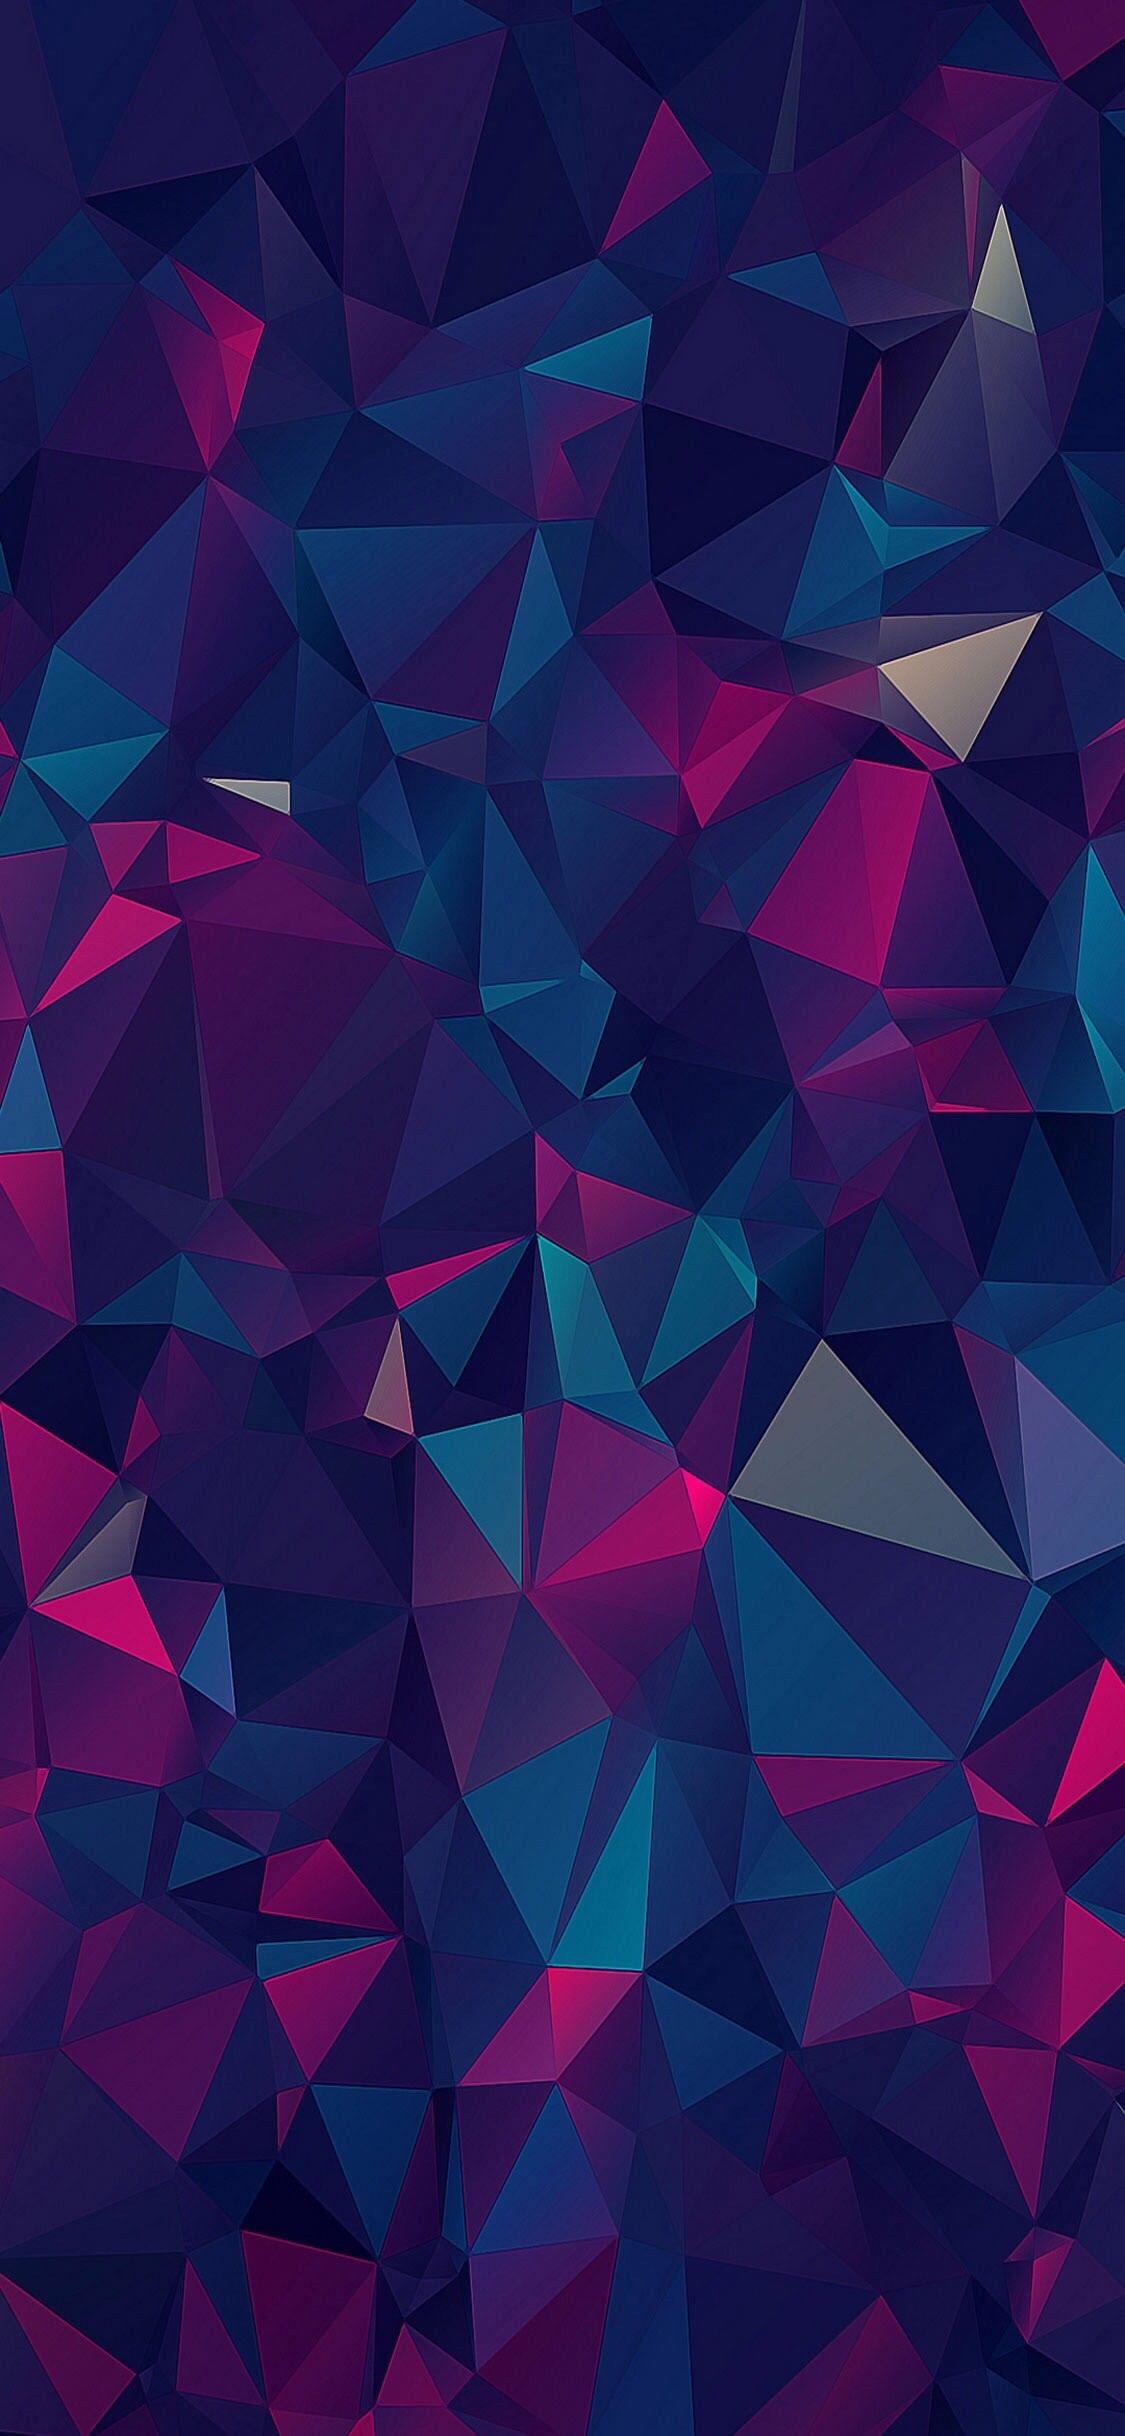 Iphone Wallpaper Abstract Hd